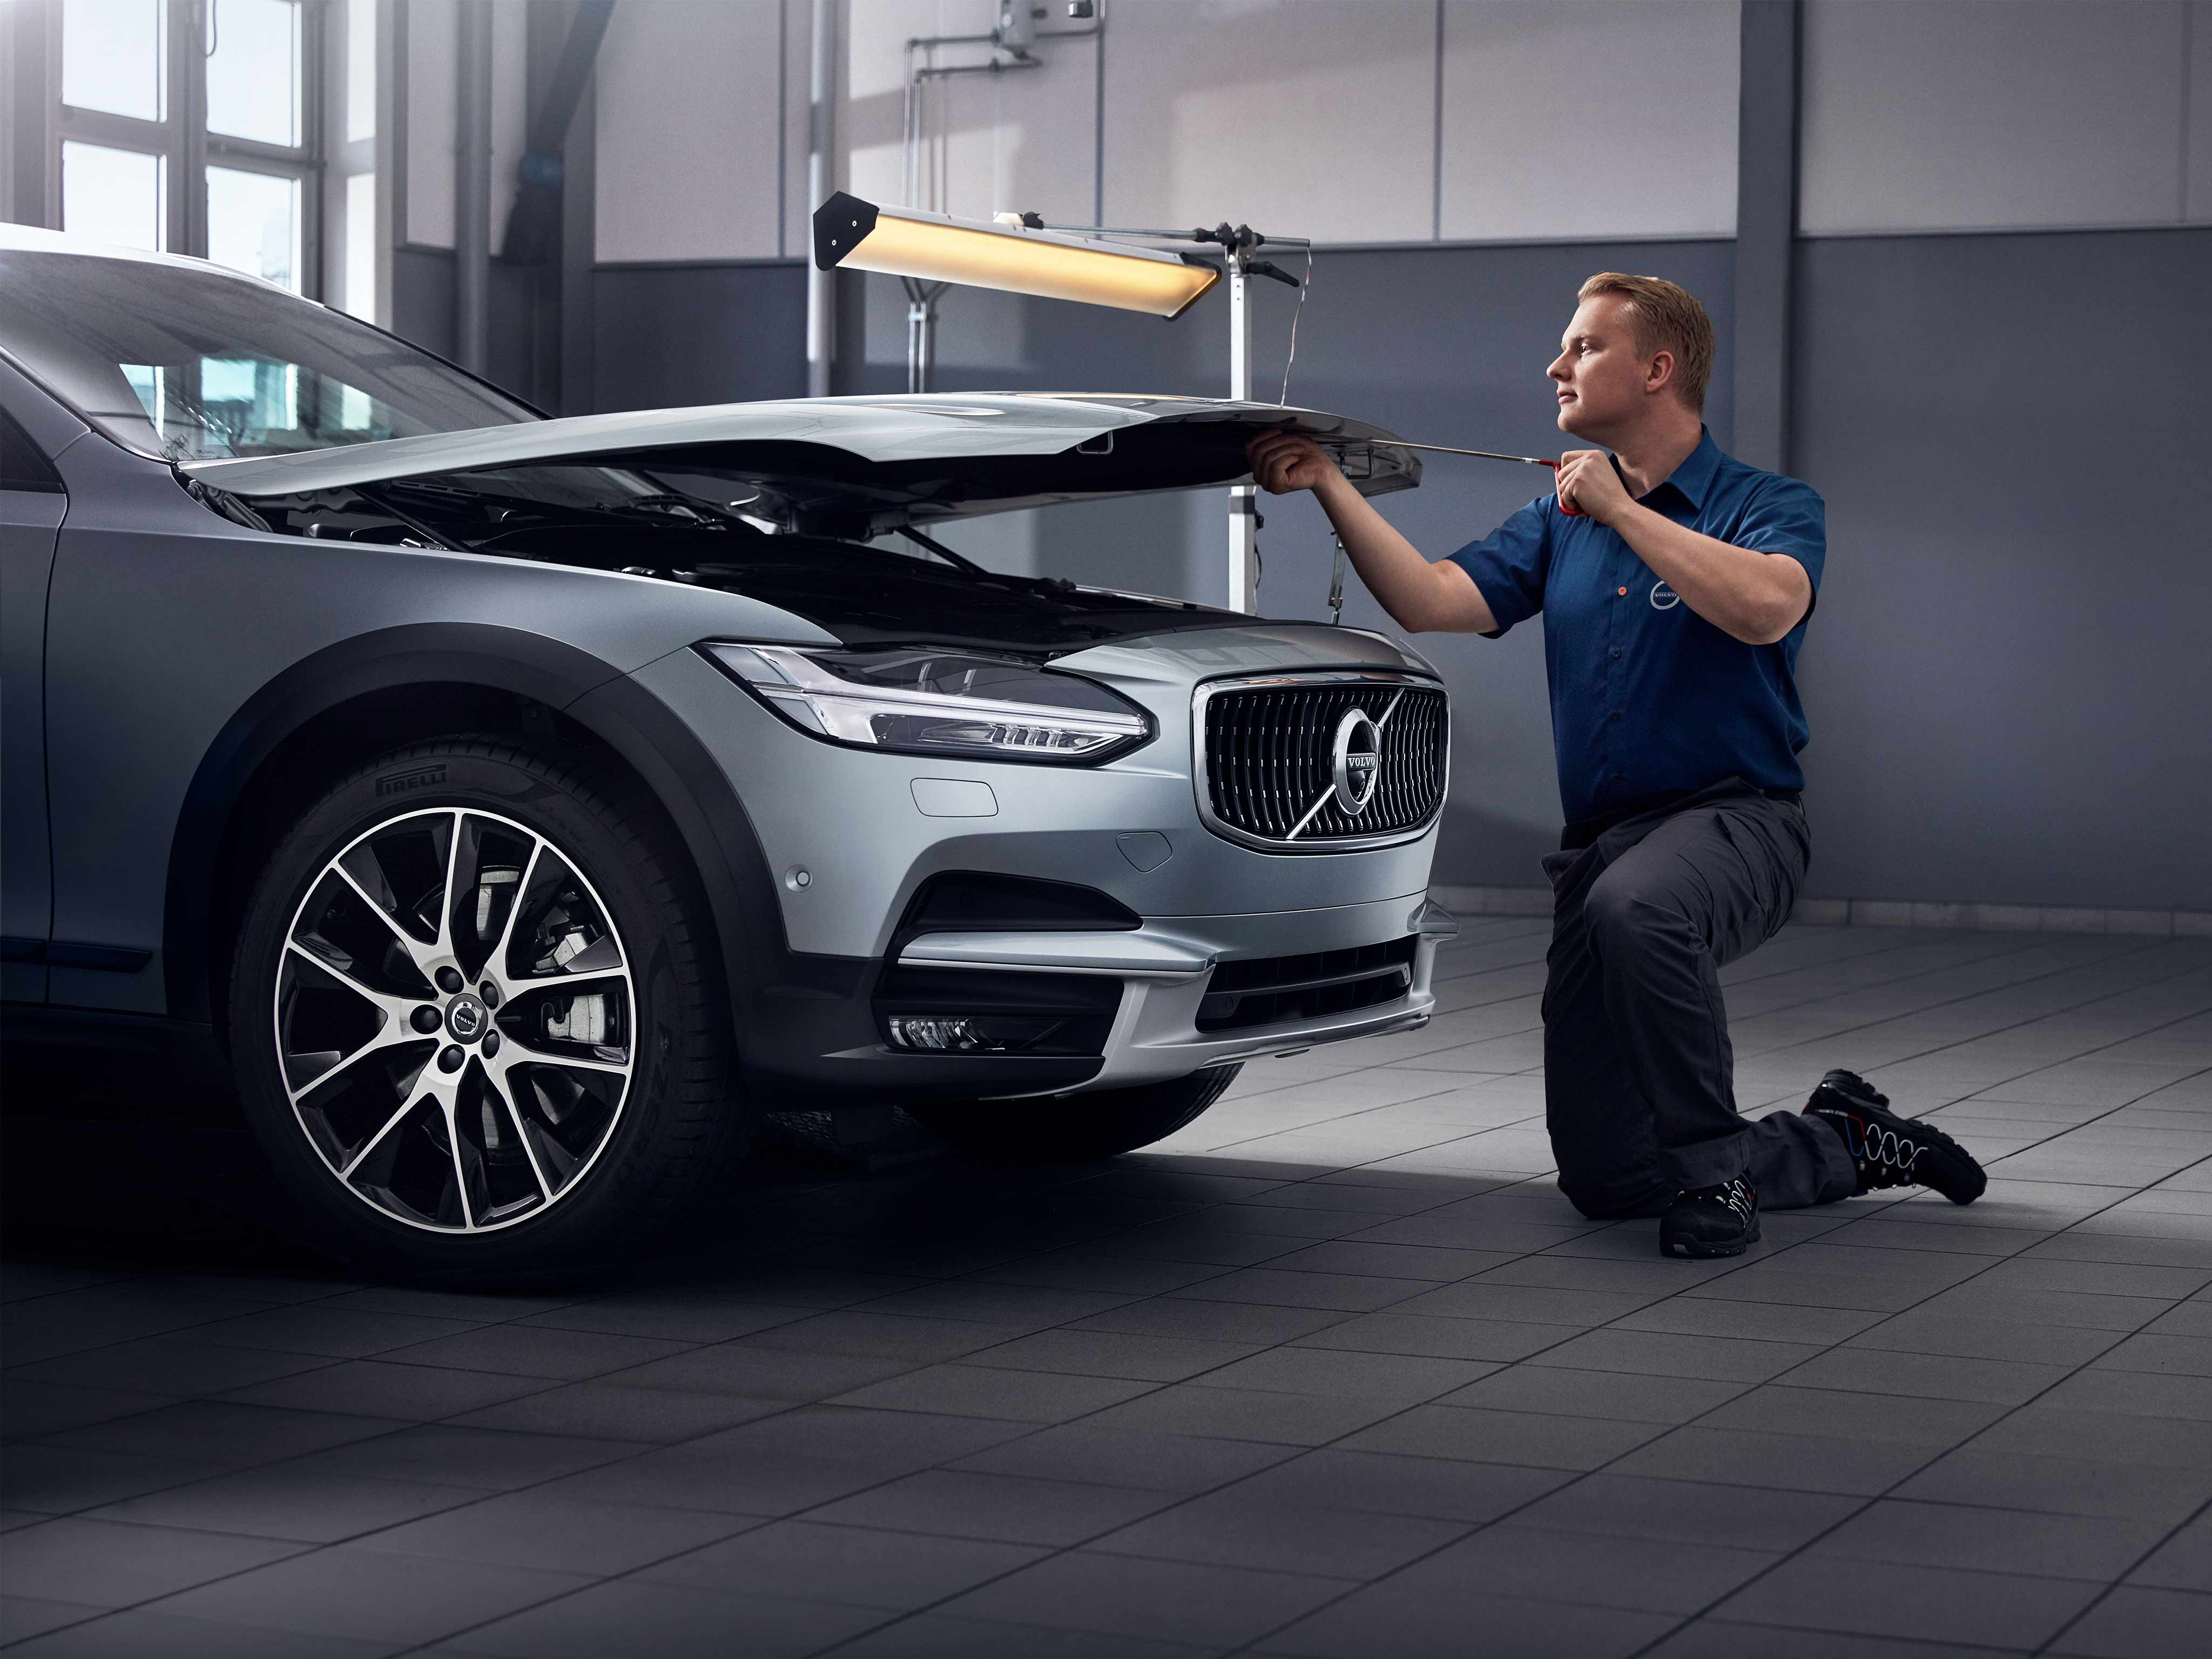 Man repairing a Volvo car with hood open.